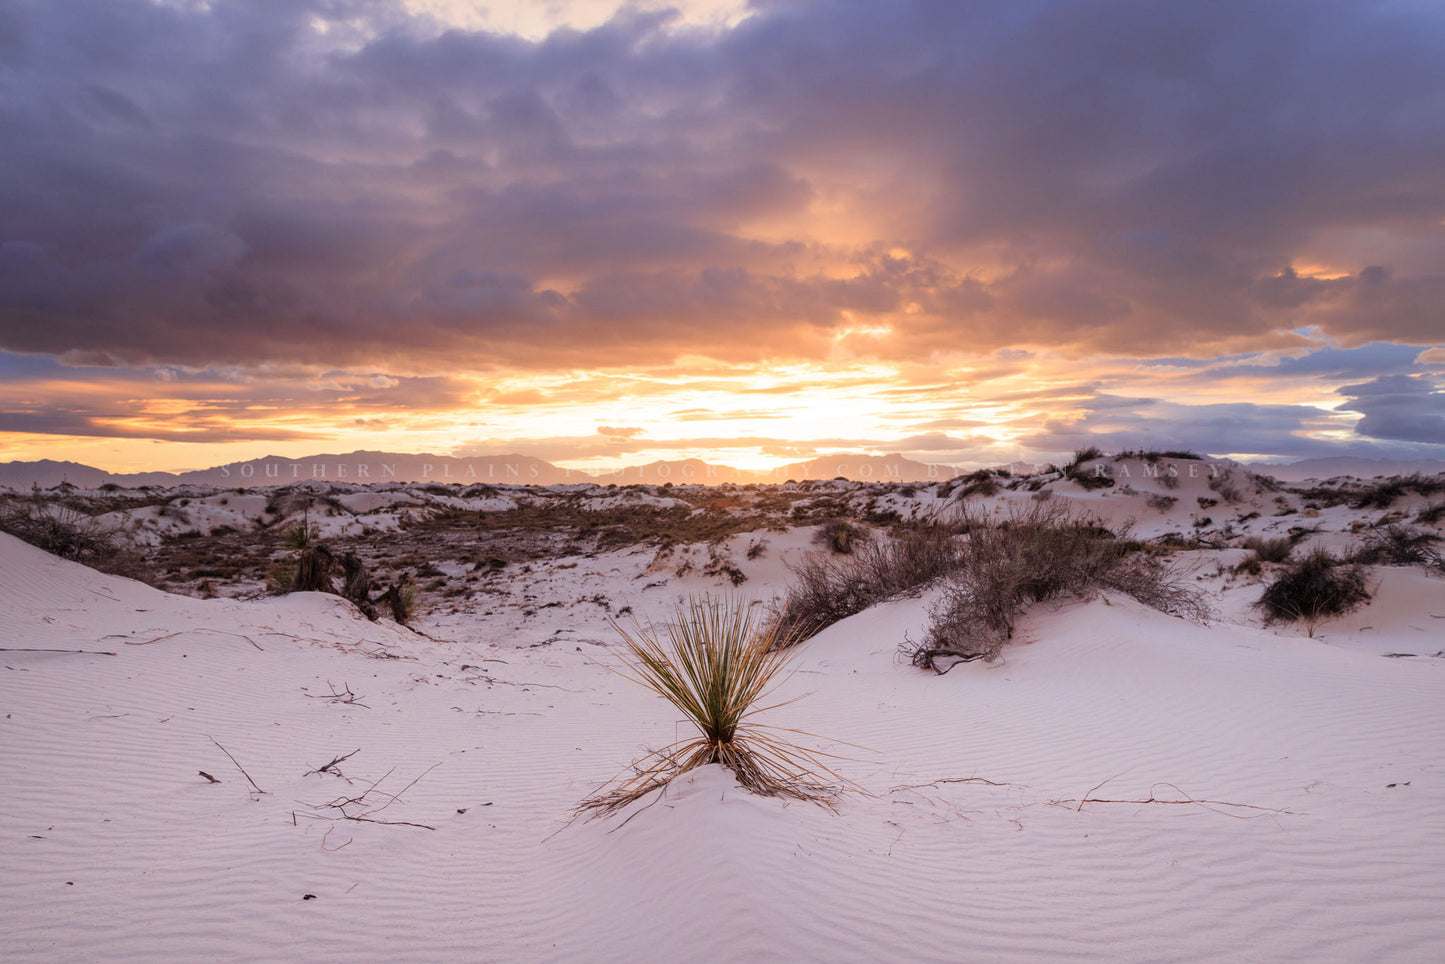 Desert photography print of a lone yucca plant among sand dunes as a golden sunset takes place over White Sands National Park, New Mexico by Sean Ramsey of Southern Plains Photography.